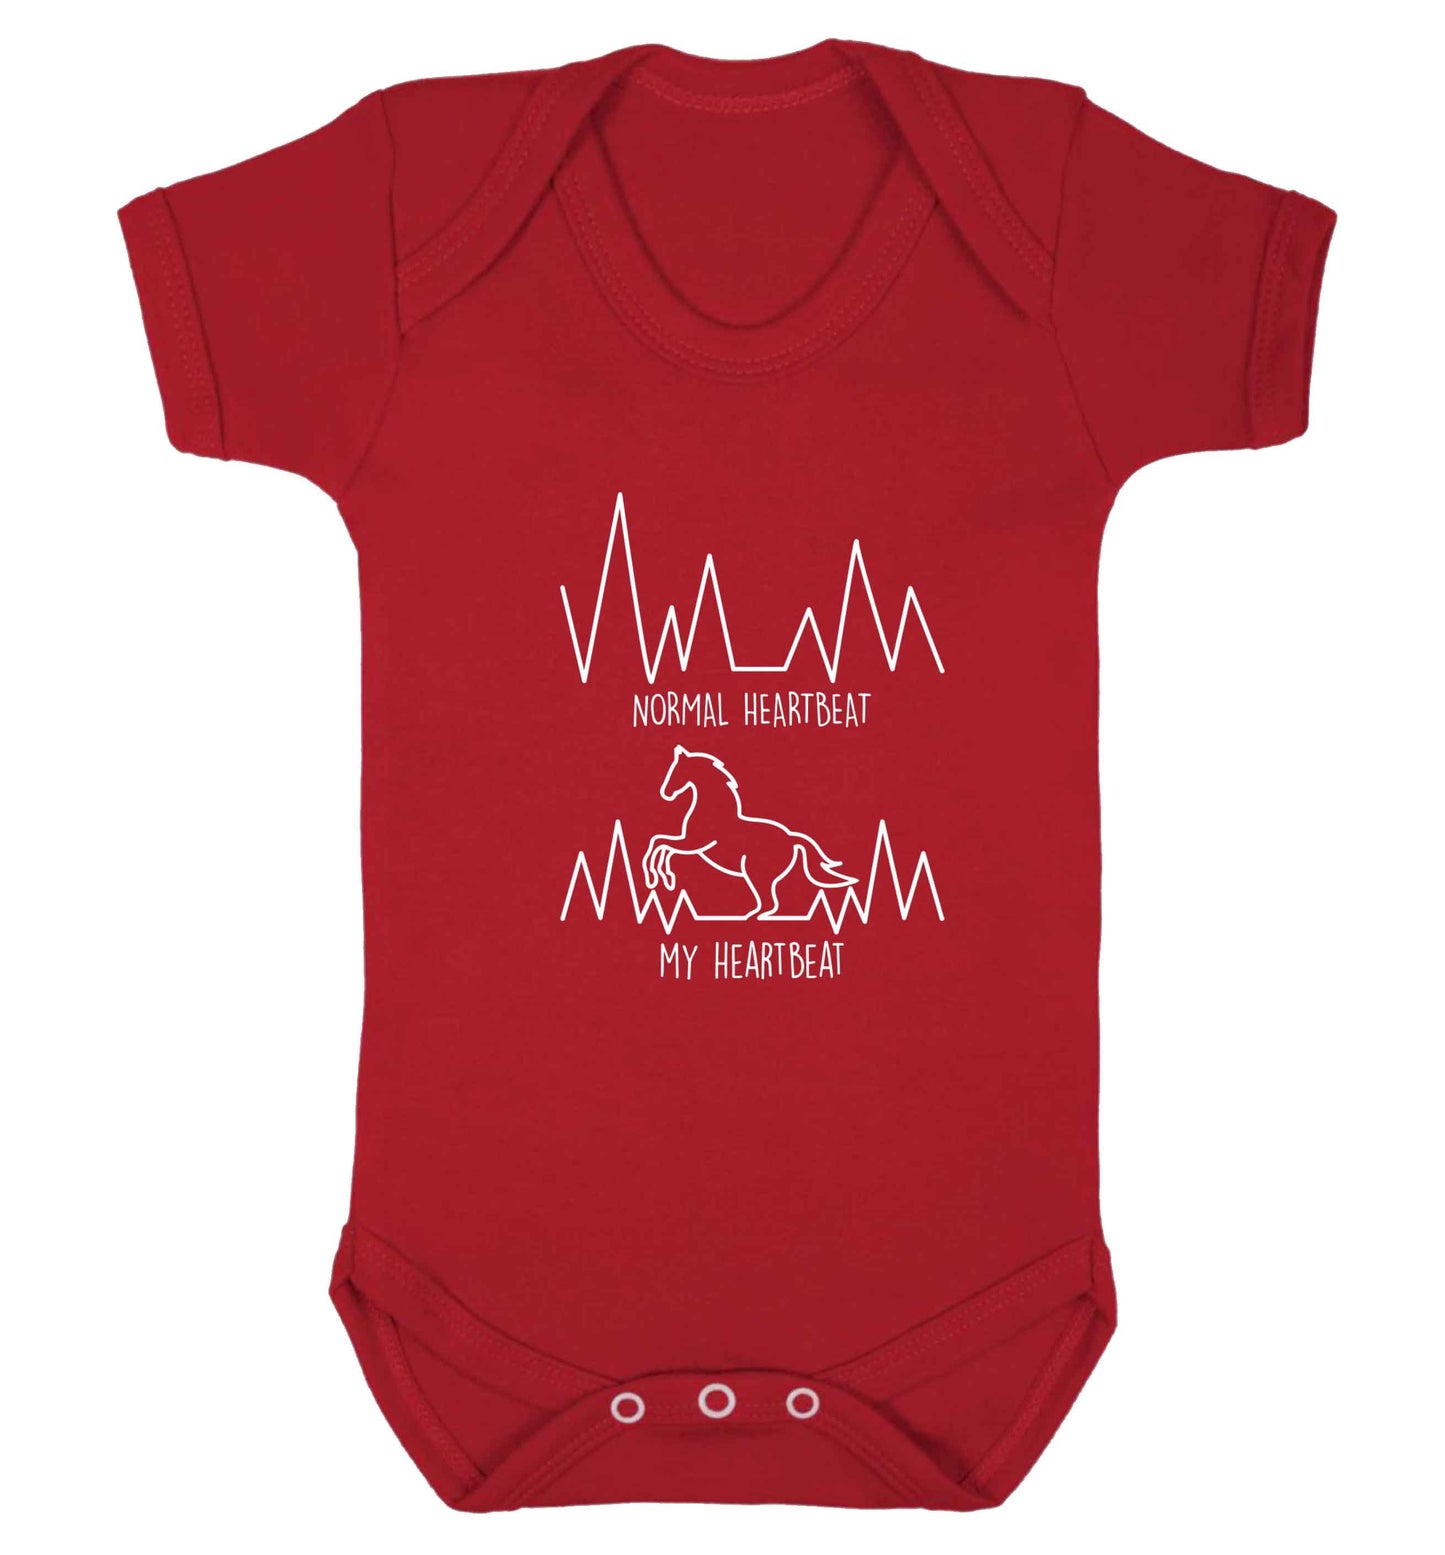 Horse - Normal heartbeat my heartbeat baby vest red 18-24 months